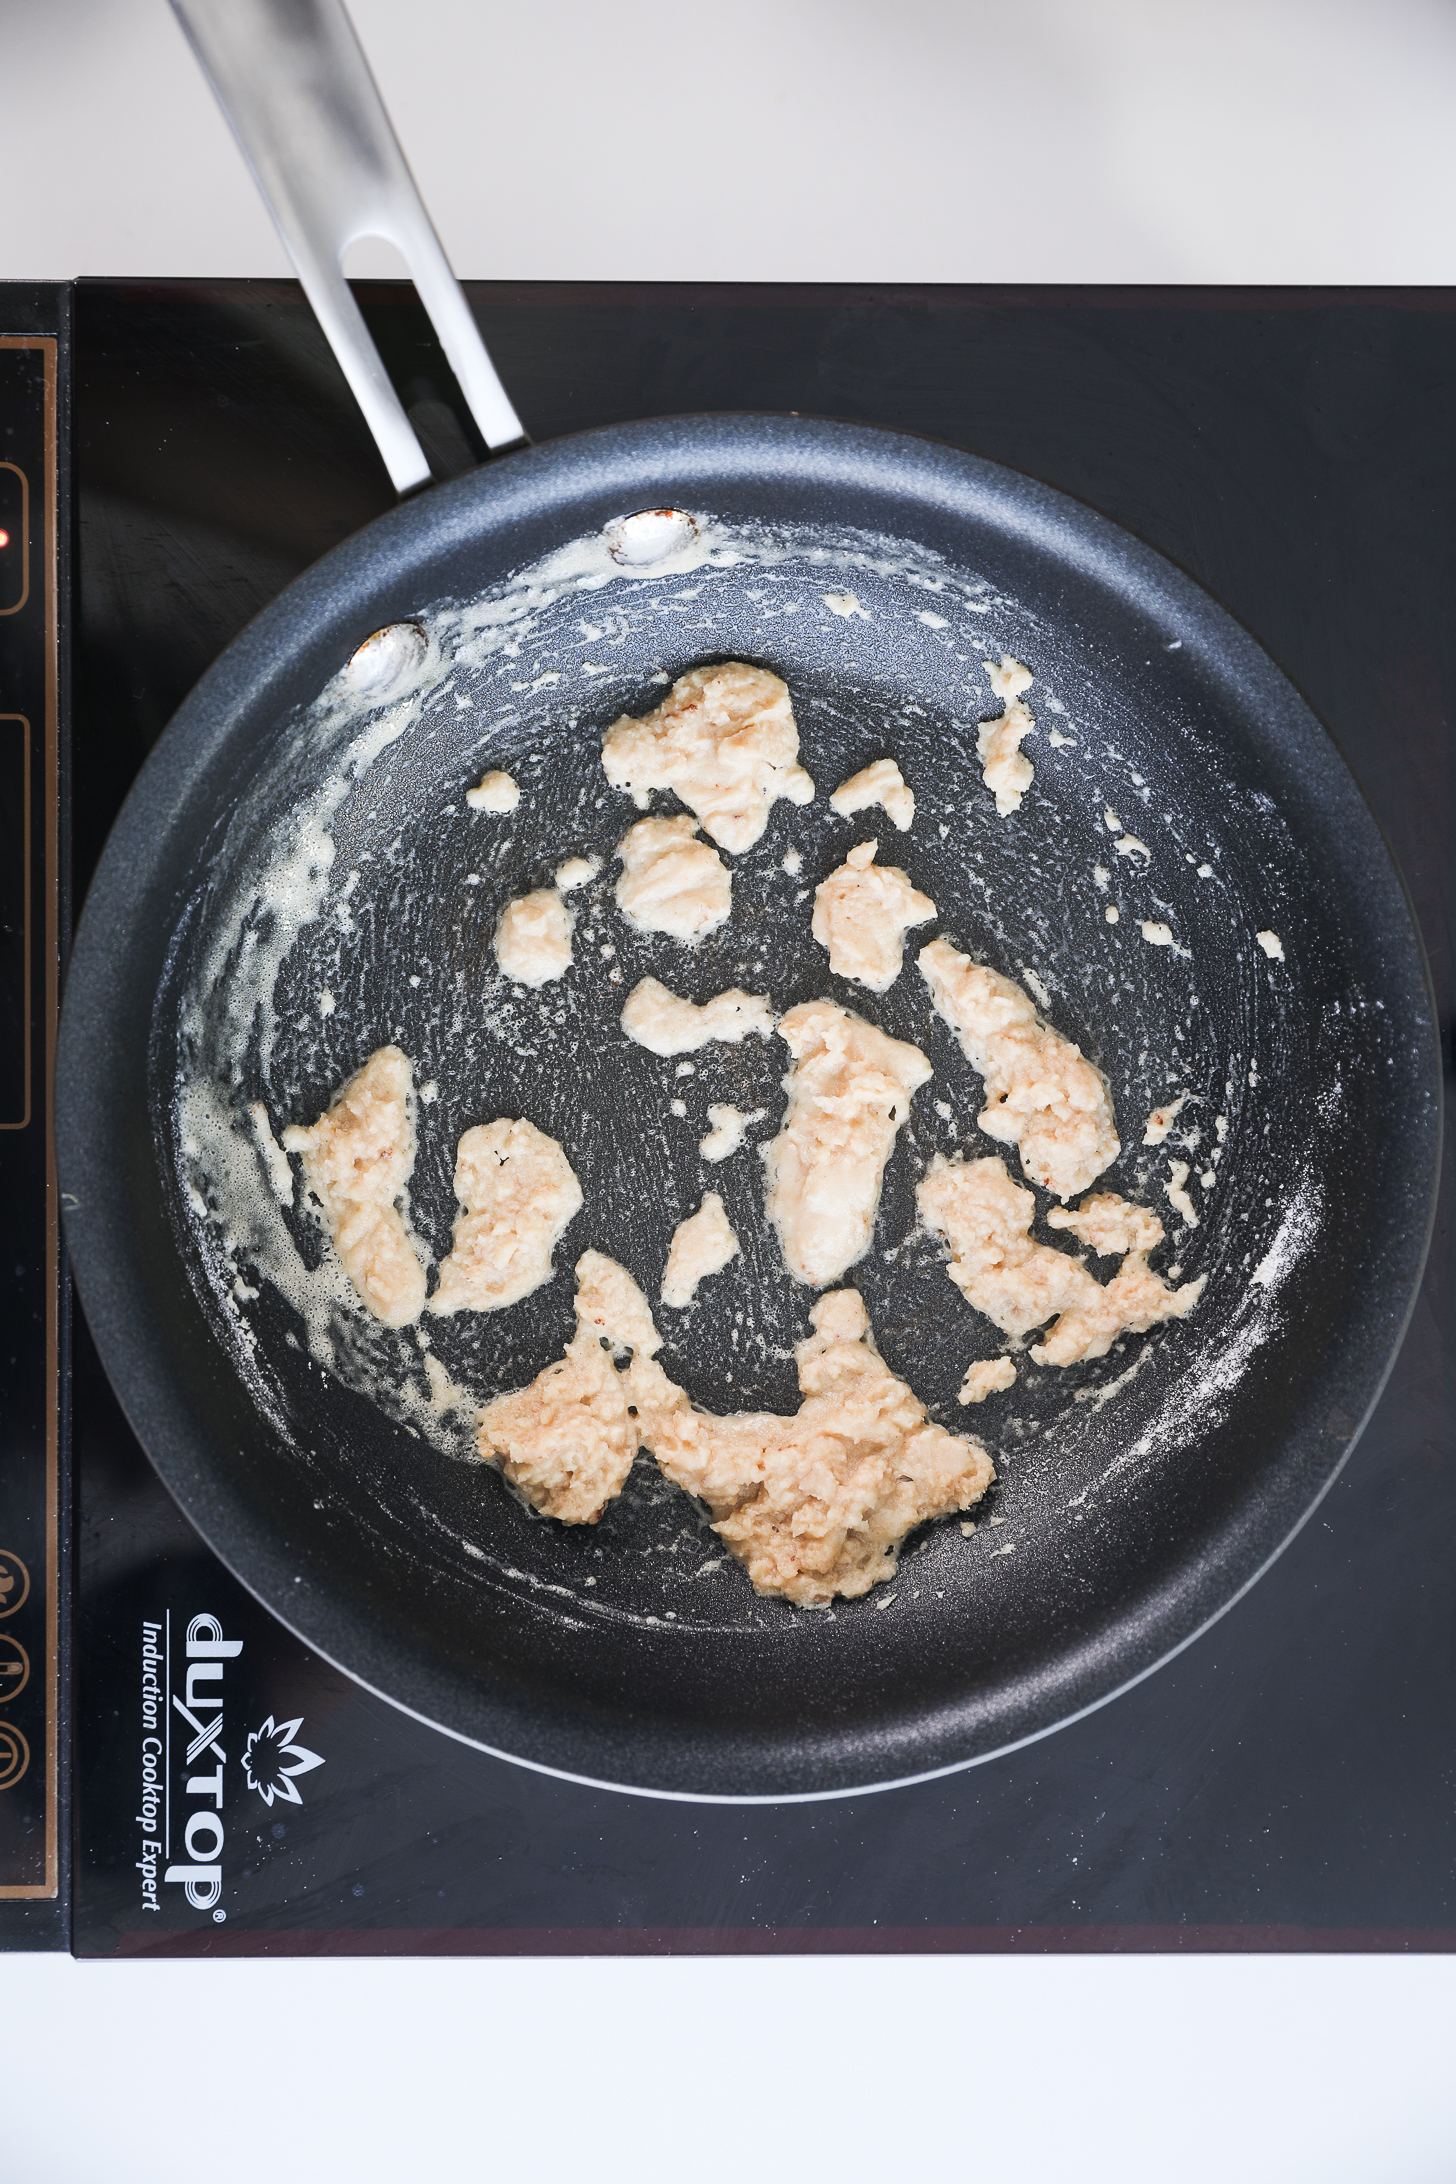 A pan with flour and butter lumps (making roux) placed on a mobile cooktop.